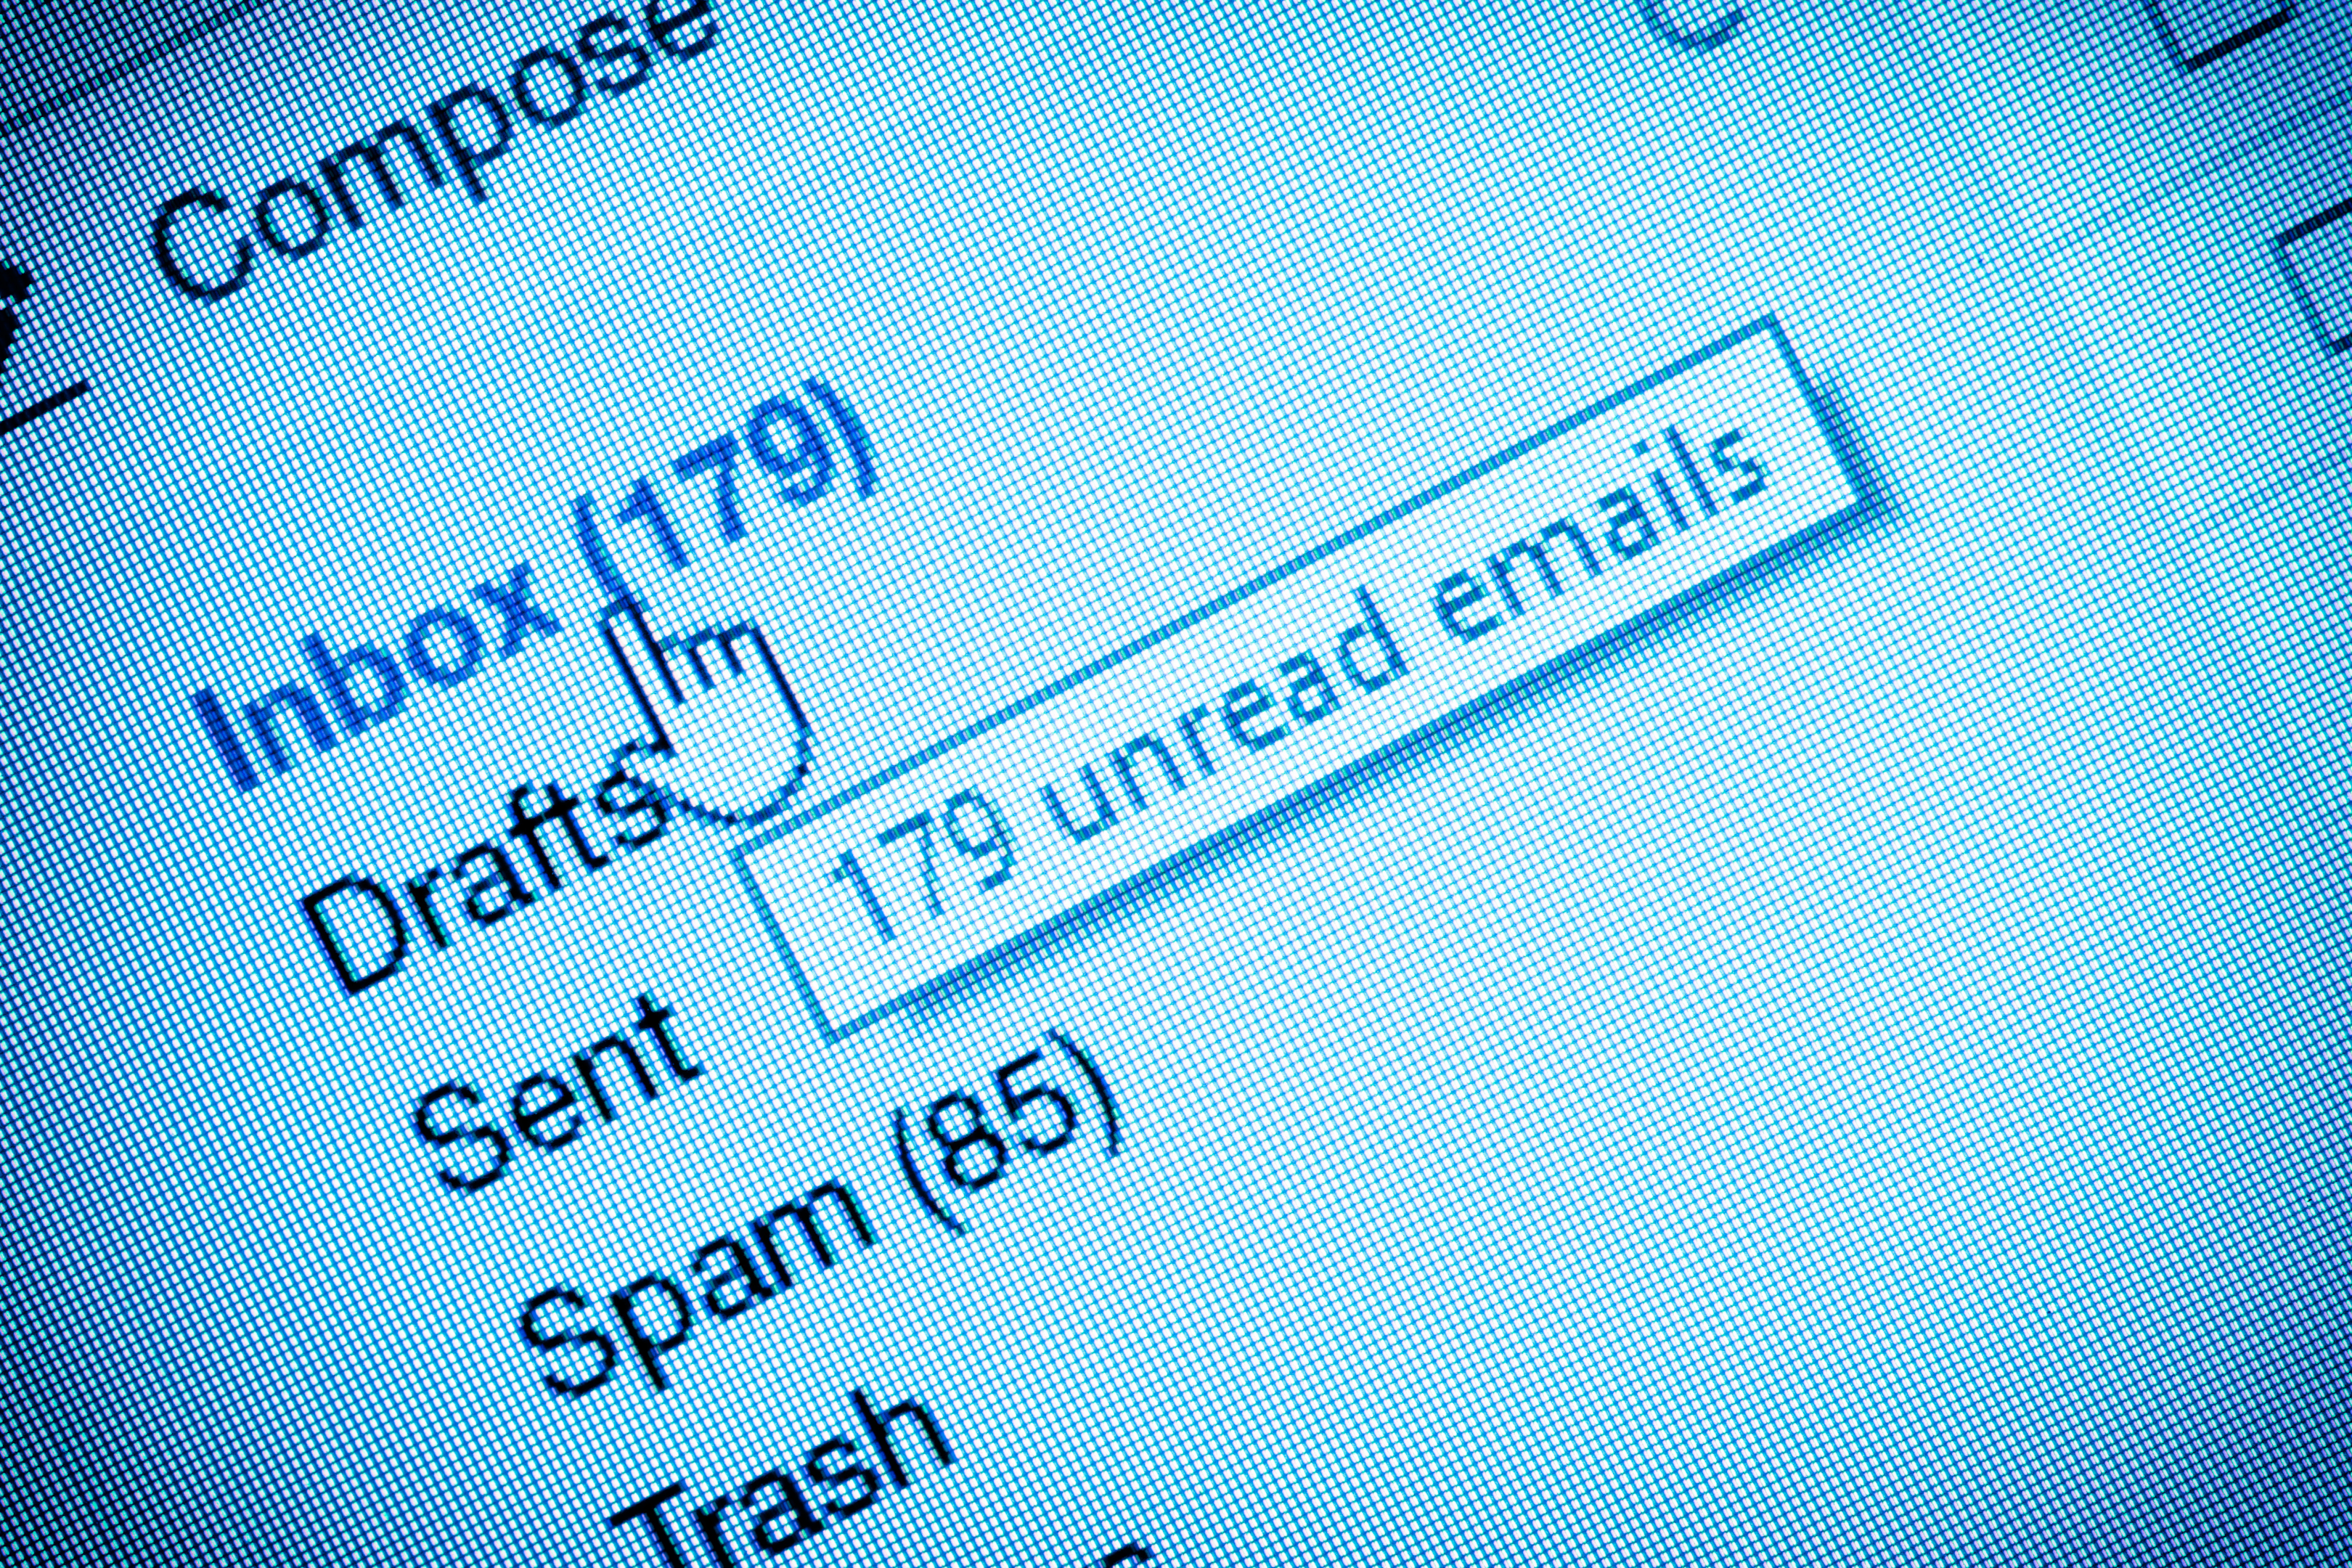 Email management tips for a cleaner inbox.